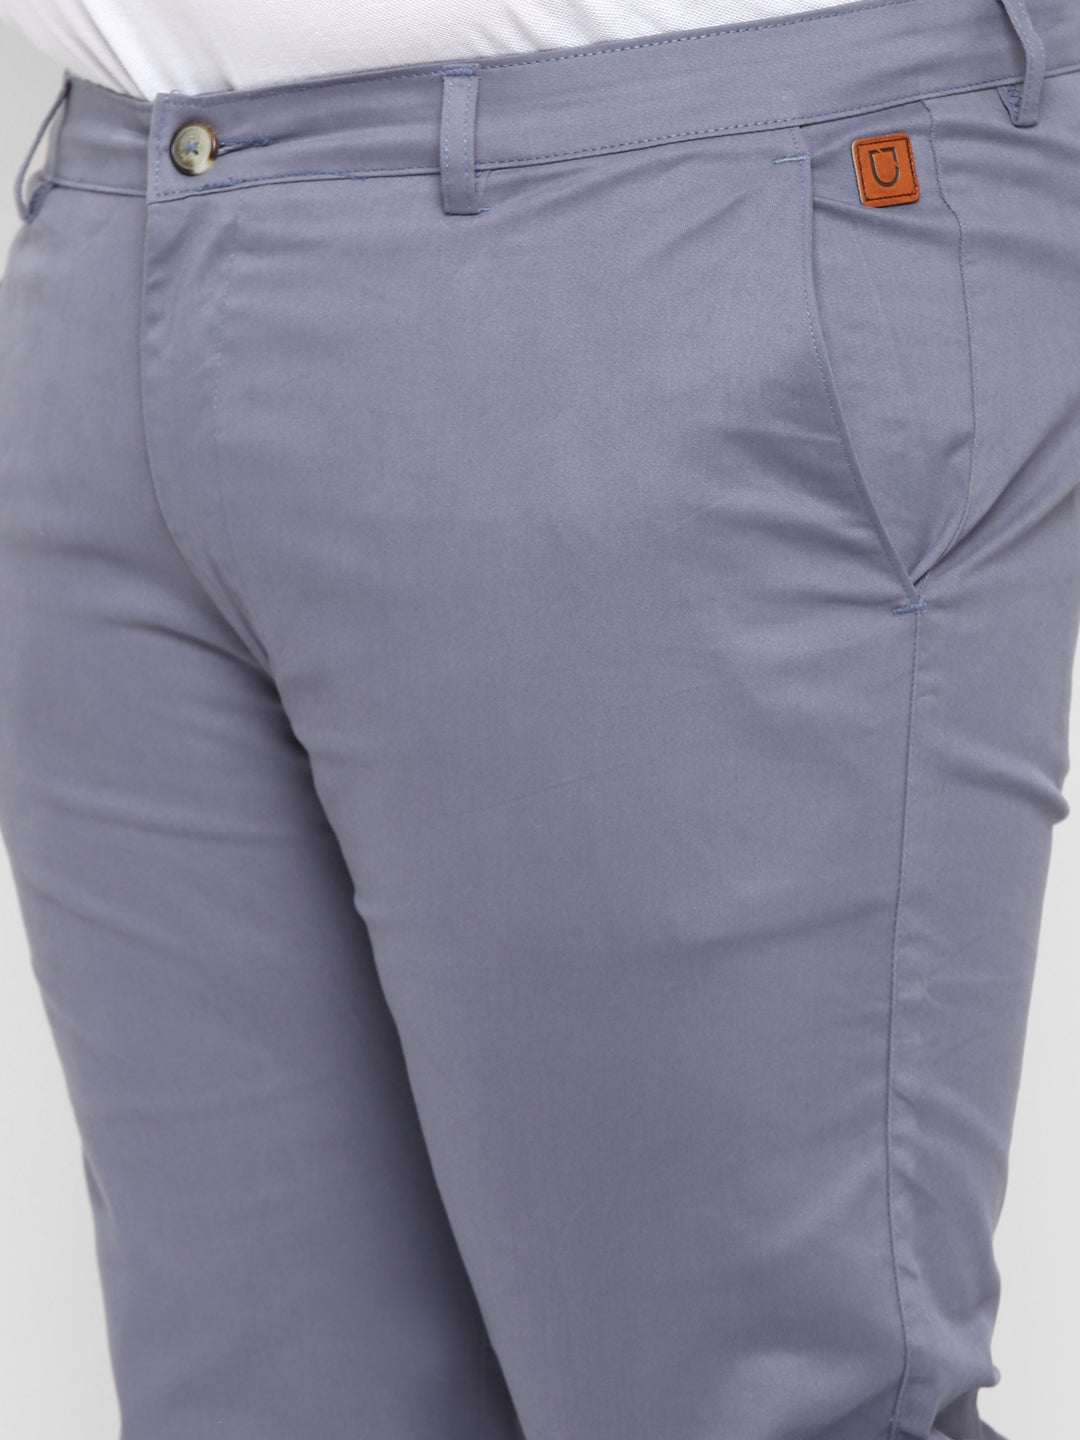 Plus Men's Steel Blue Cotton Regular Fit Casual Chinos Trousers Stretch